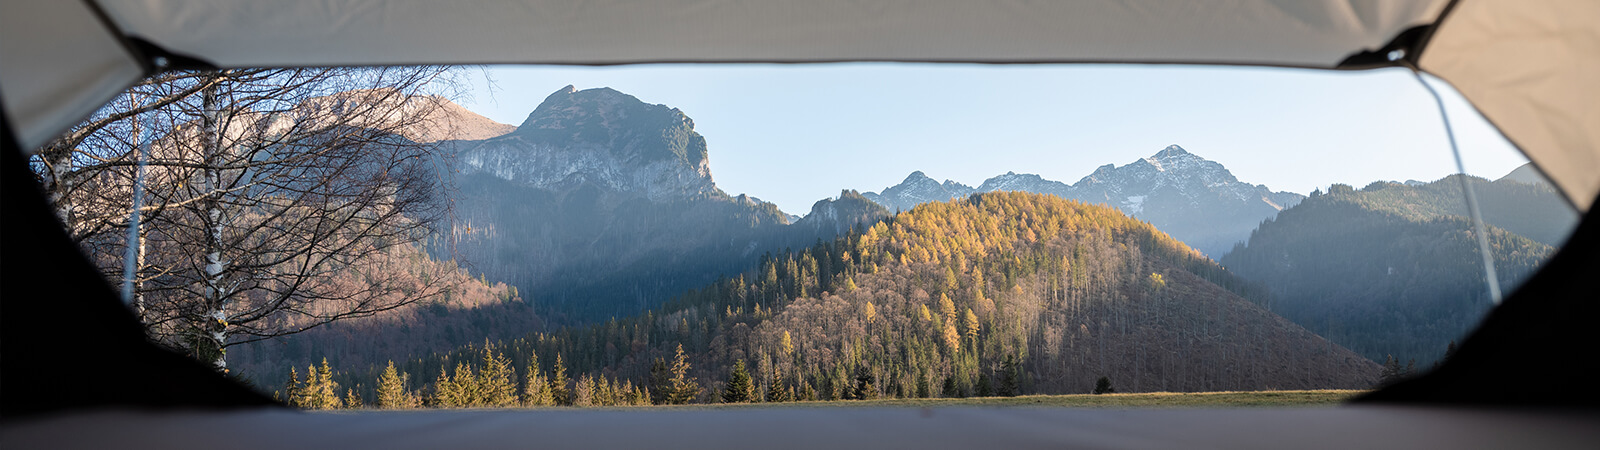 A mountain view shot from within a roof tent